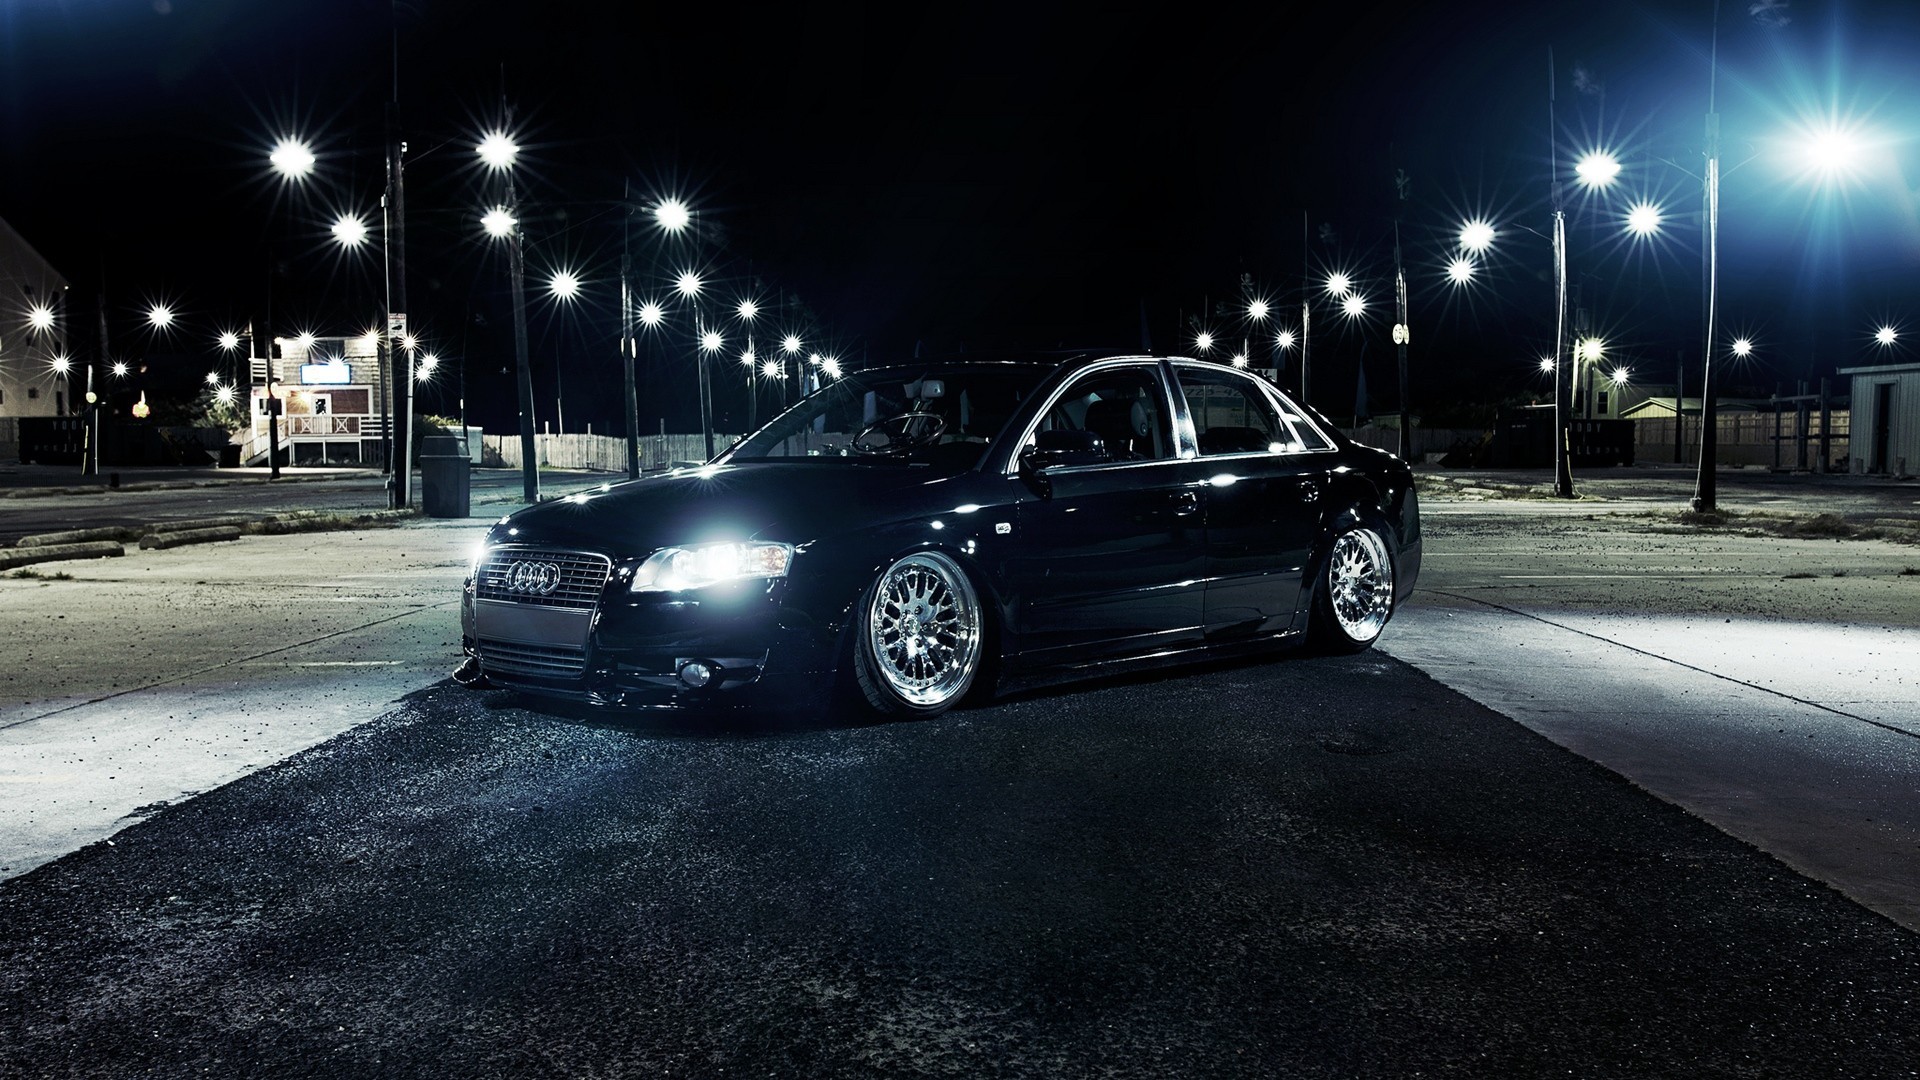 Audi A4 [1920×1080] Need #iPhone #6S #Plus #Wallpaper/ #